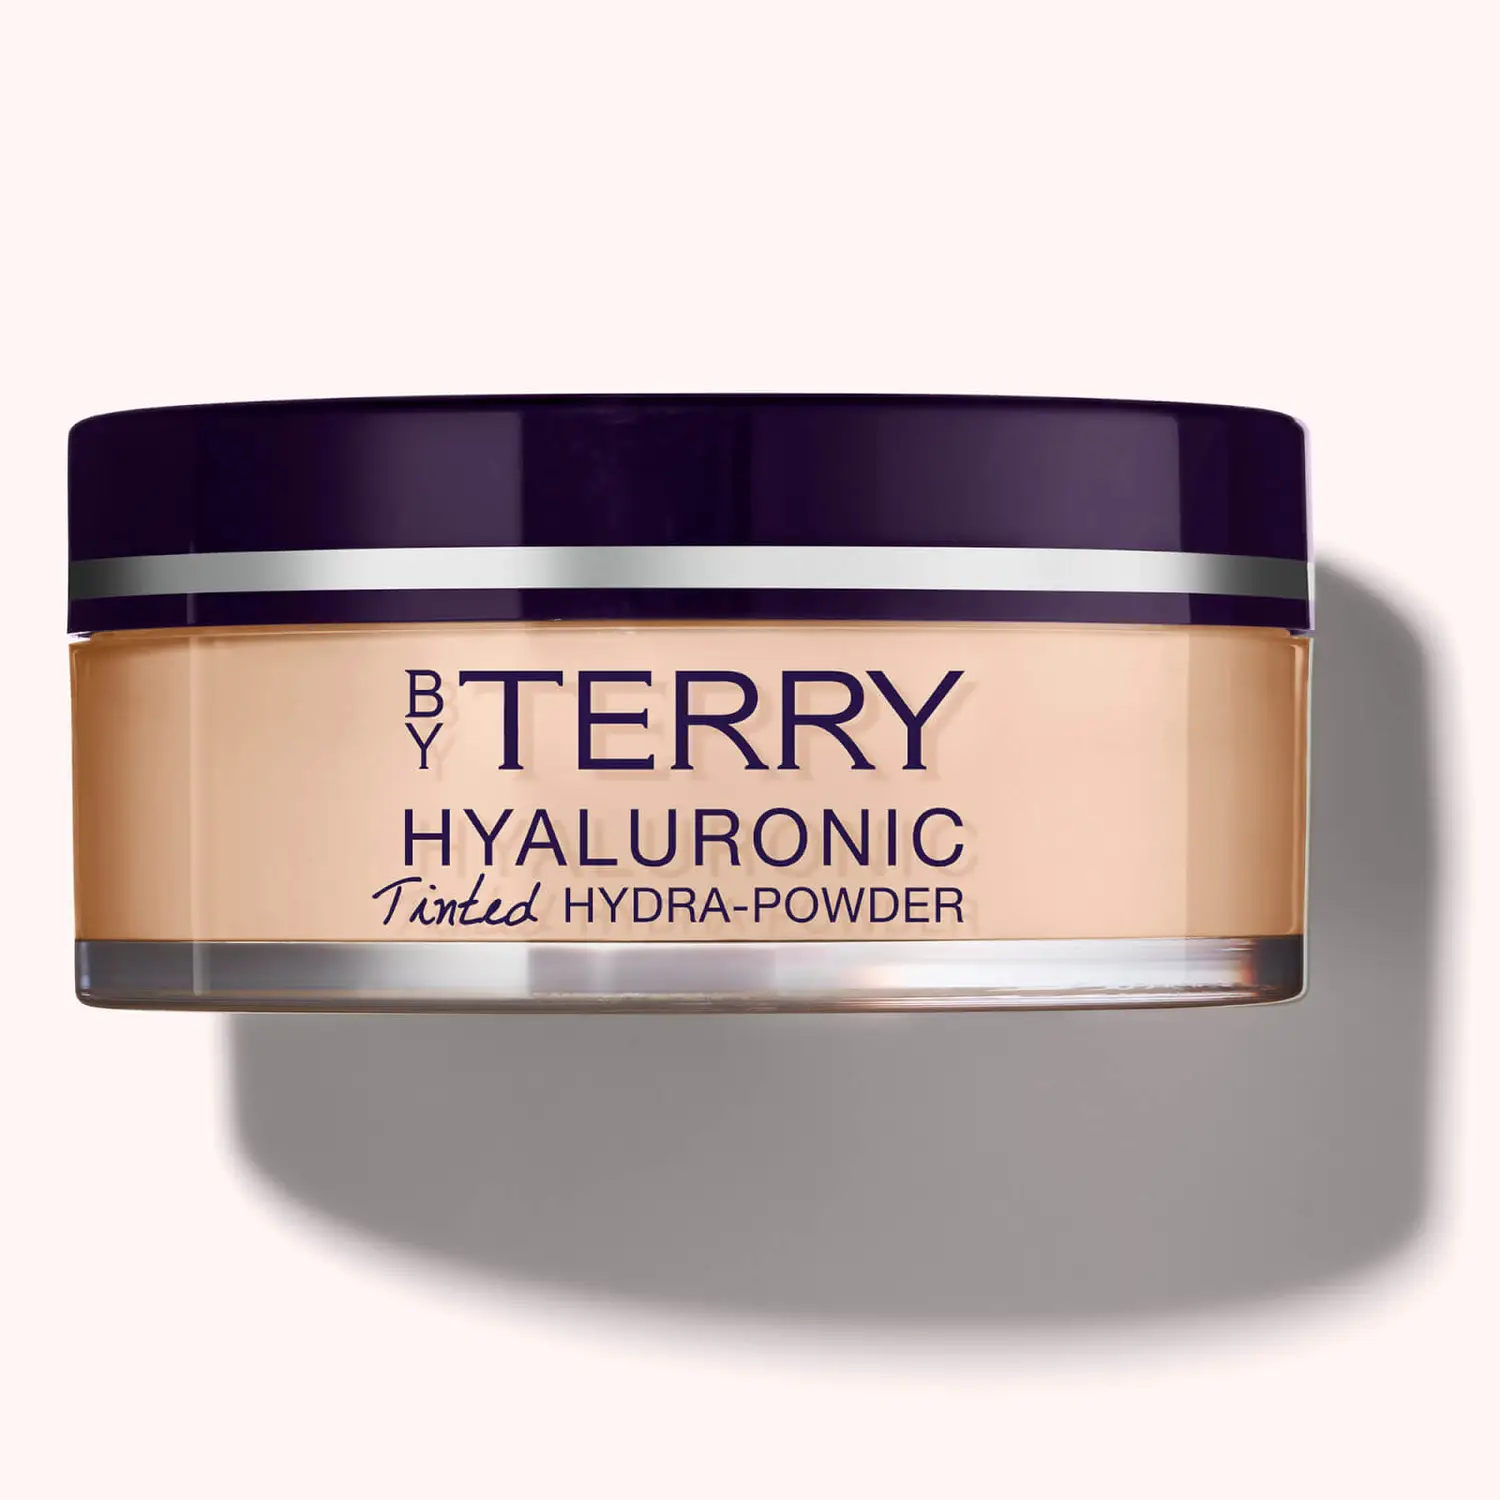 Hyaluronic Tinted Hydra-Powder, By Therry